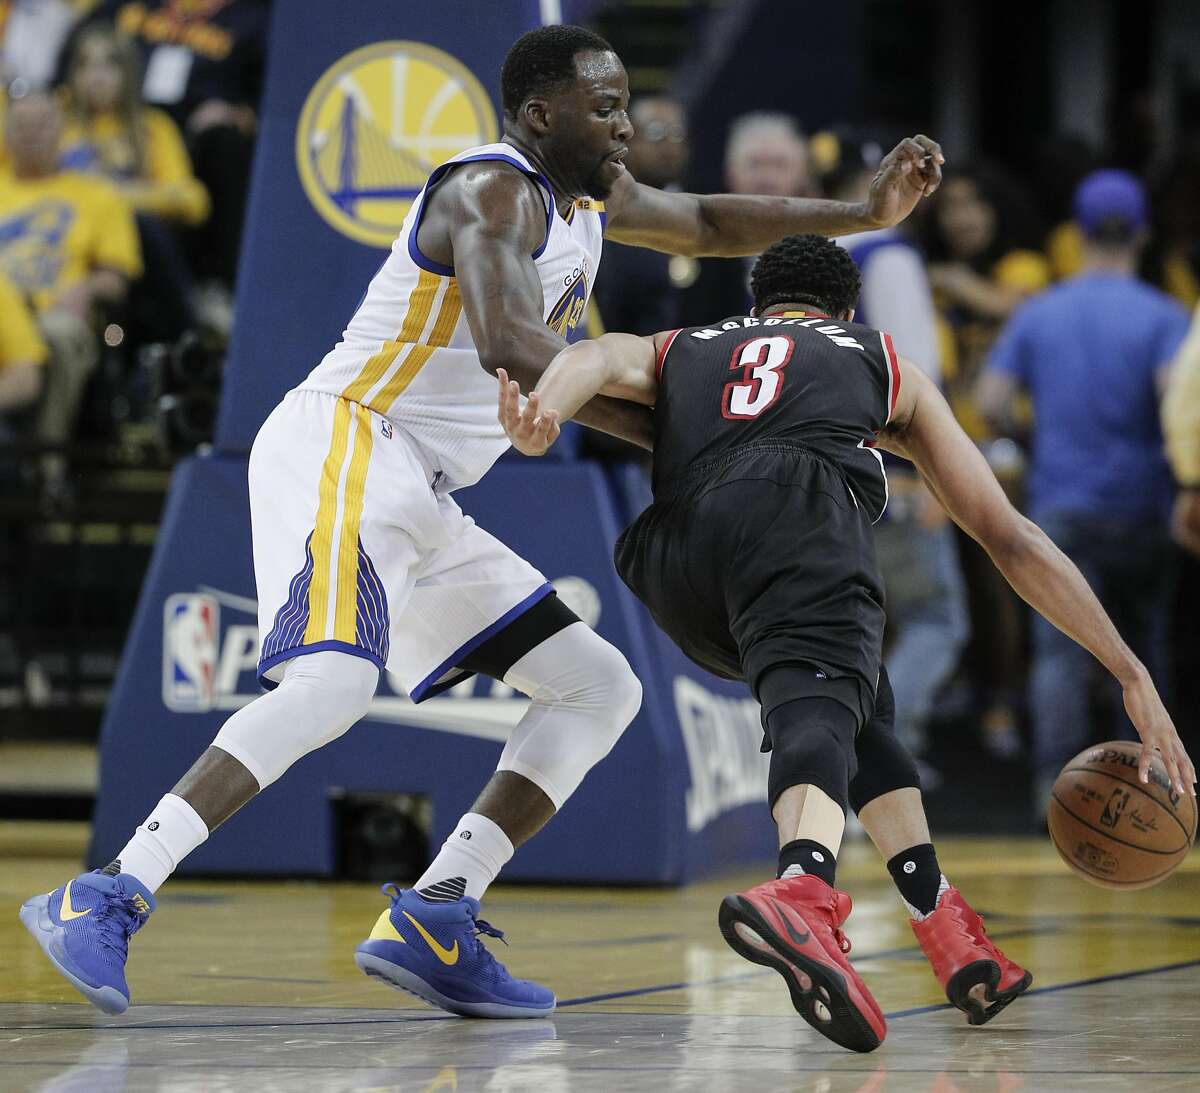 Golden State Warriors' Draymond Green guards Portland Trail Blazers' CJ McCollum in the third quarter during Game 2 of the First Round of the Western Conference 2017 NBA Playoffs at Oracle Arena on Wednesday, April 19, 2017 in Oakland, Calif.